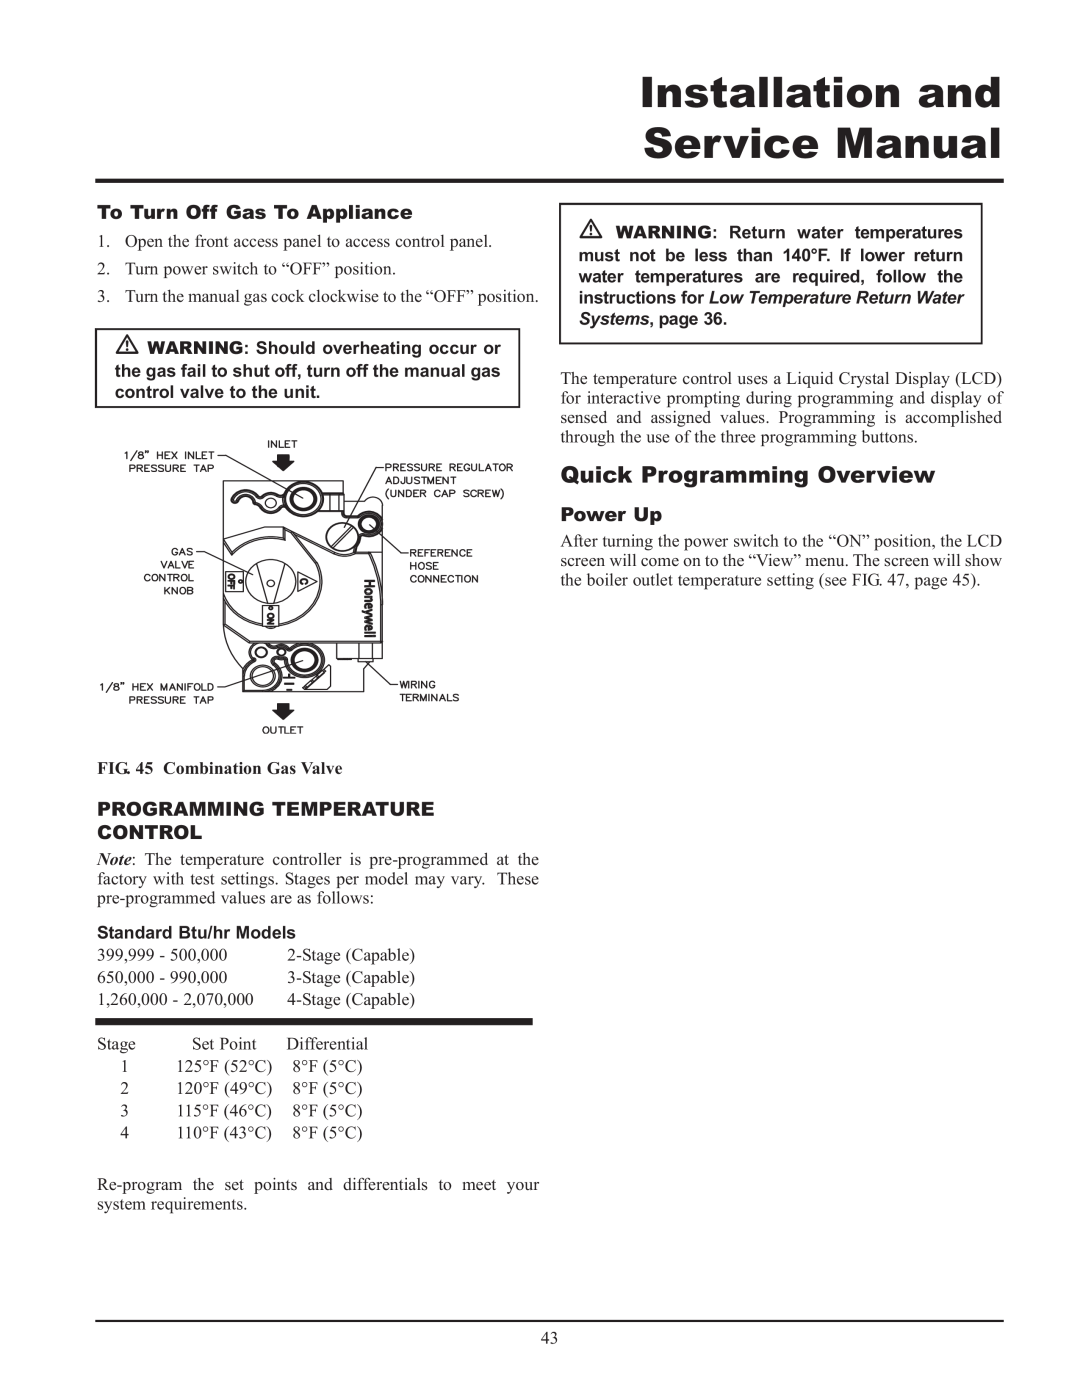 Lochinvar CF-CH(E)-i&s-08, 399 Quick Programming Overview, To Turn Off Gas To Appliance, Power Up, Combination Gas Valve 